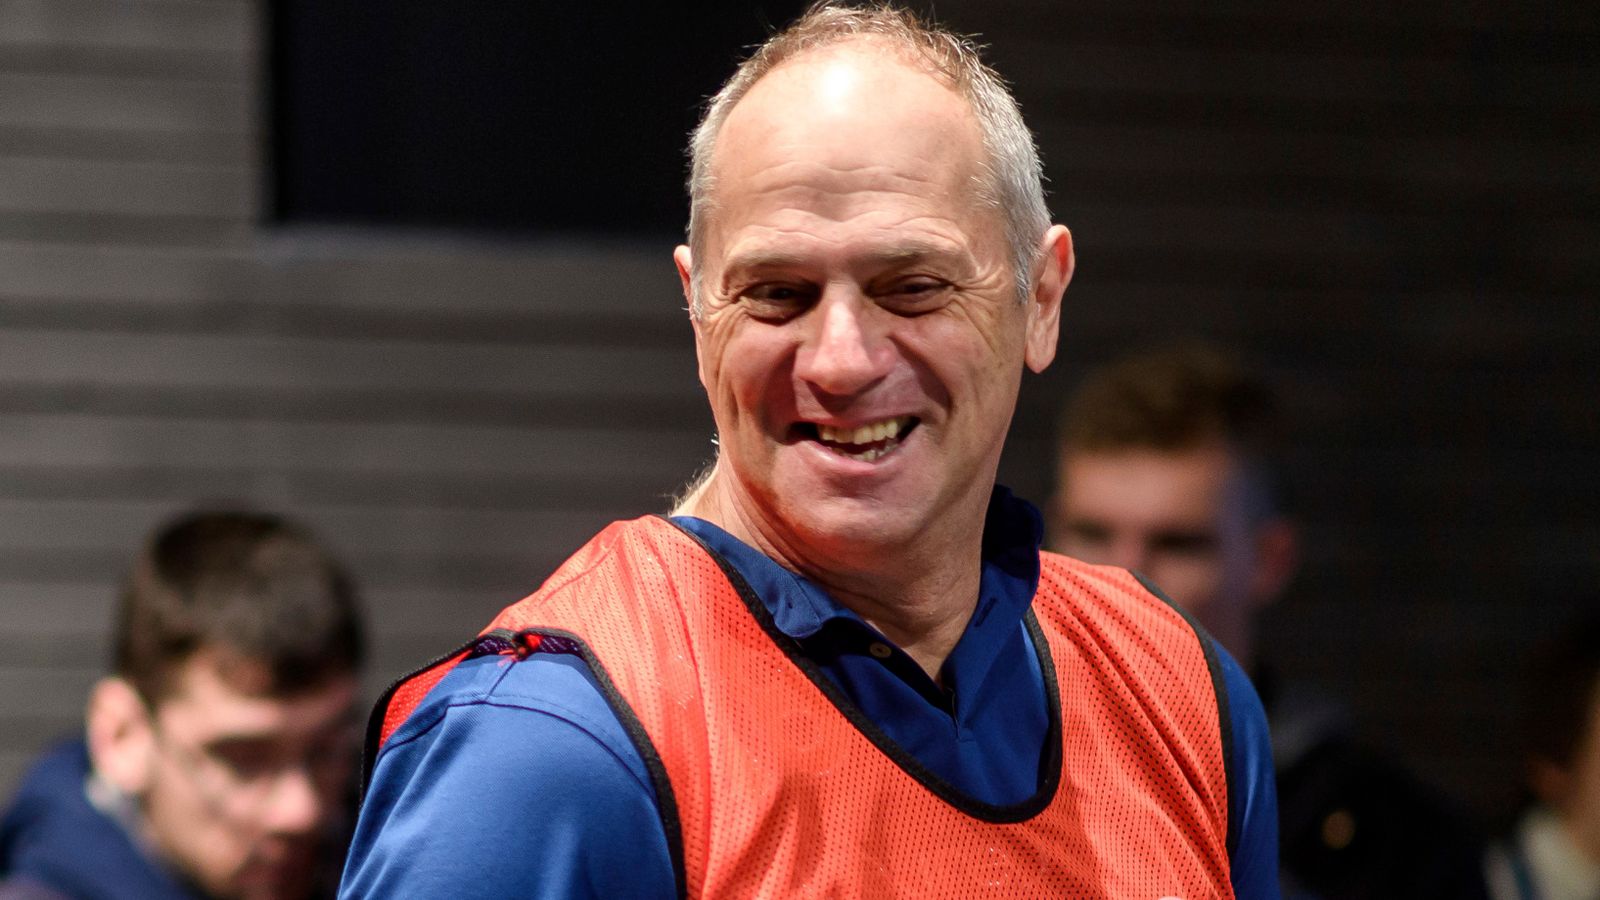 Sir Steve Redgrave in talks with United States Rowing Association over possible role